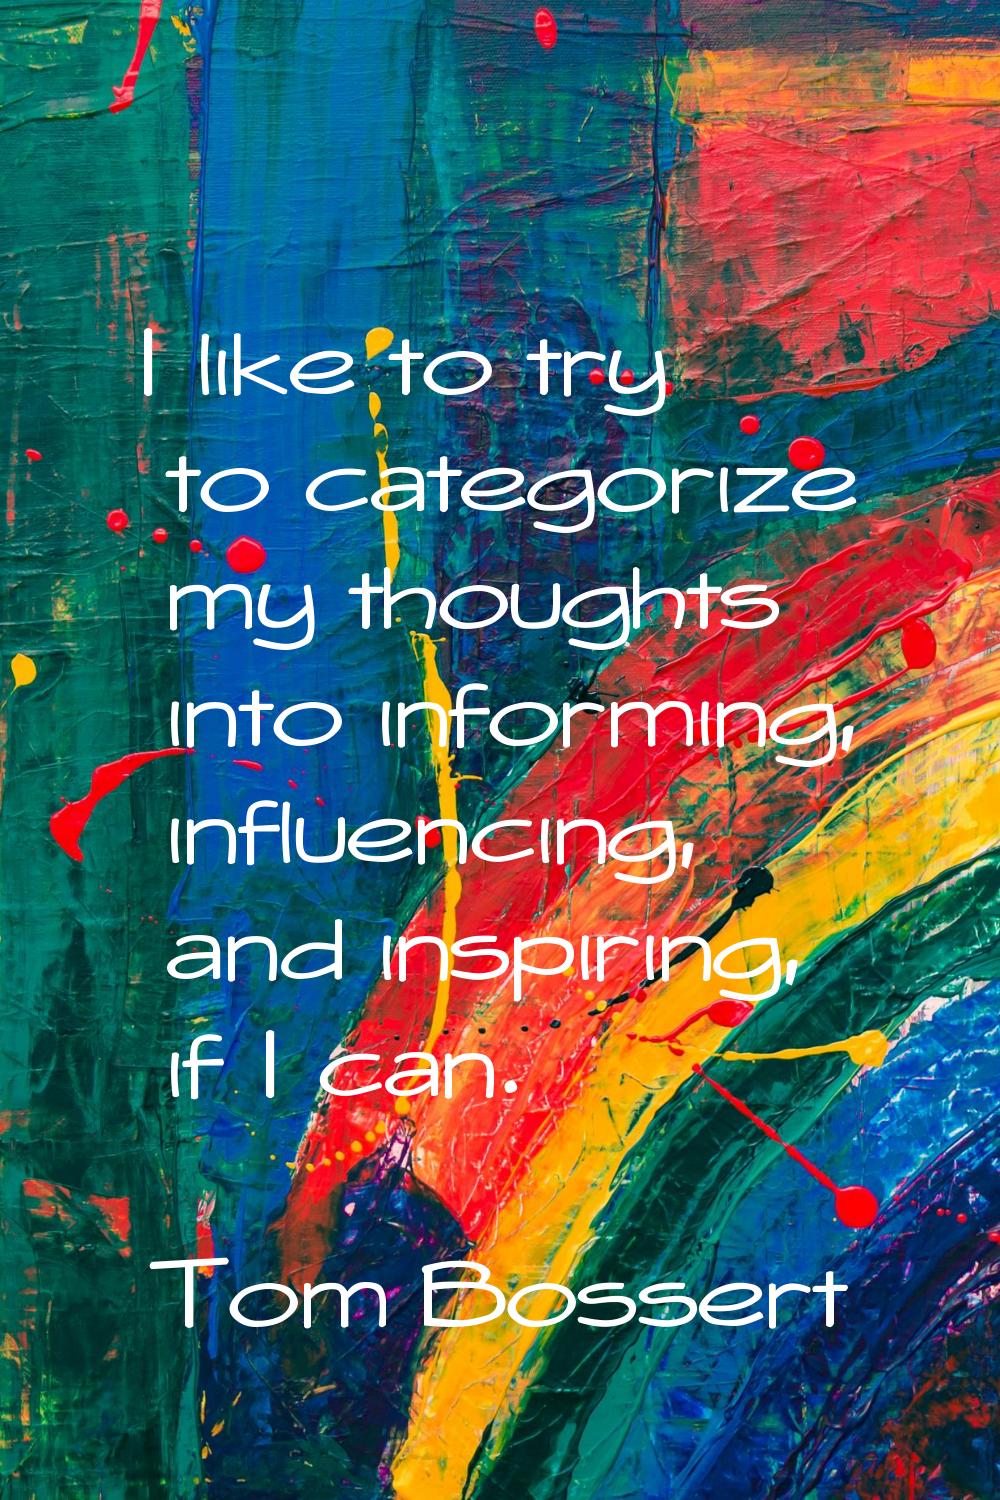 I like to try to categorize my thoughts into informing, influencing, and inspiring, if I can.